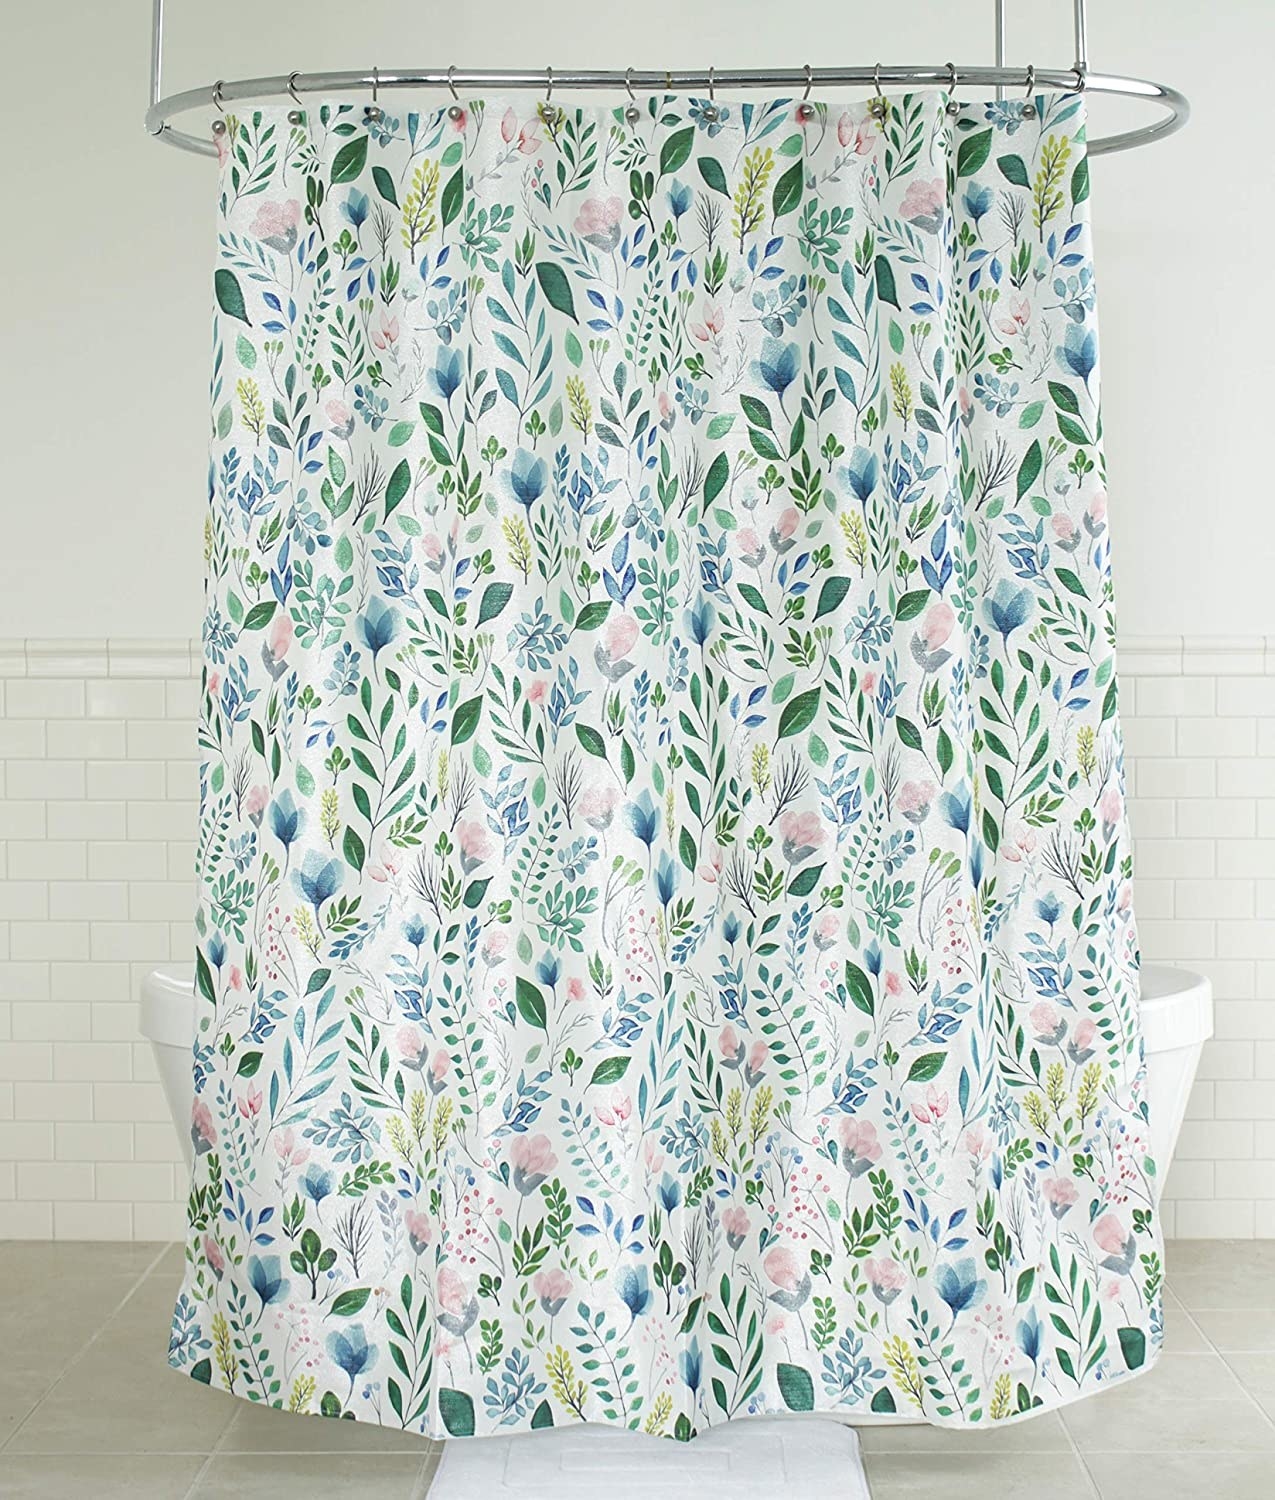 the shower curtain covered in flower and leaf illustrations